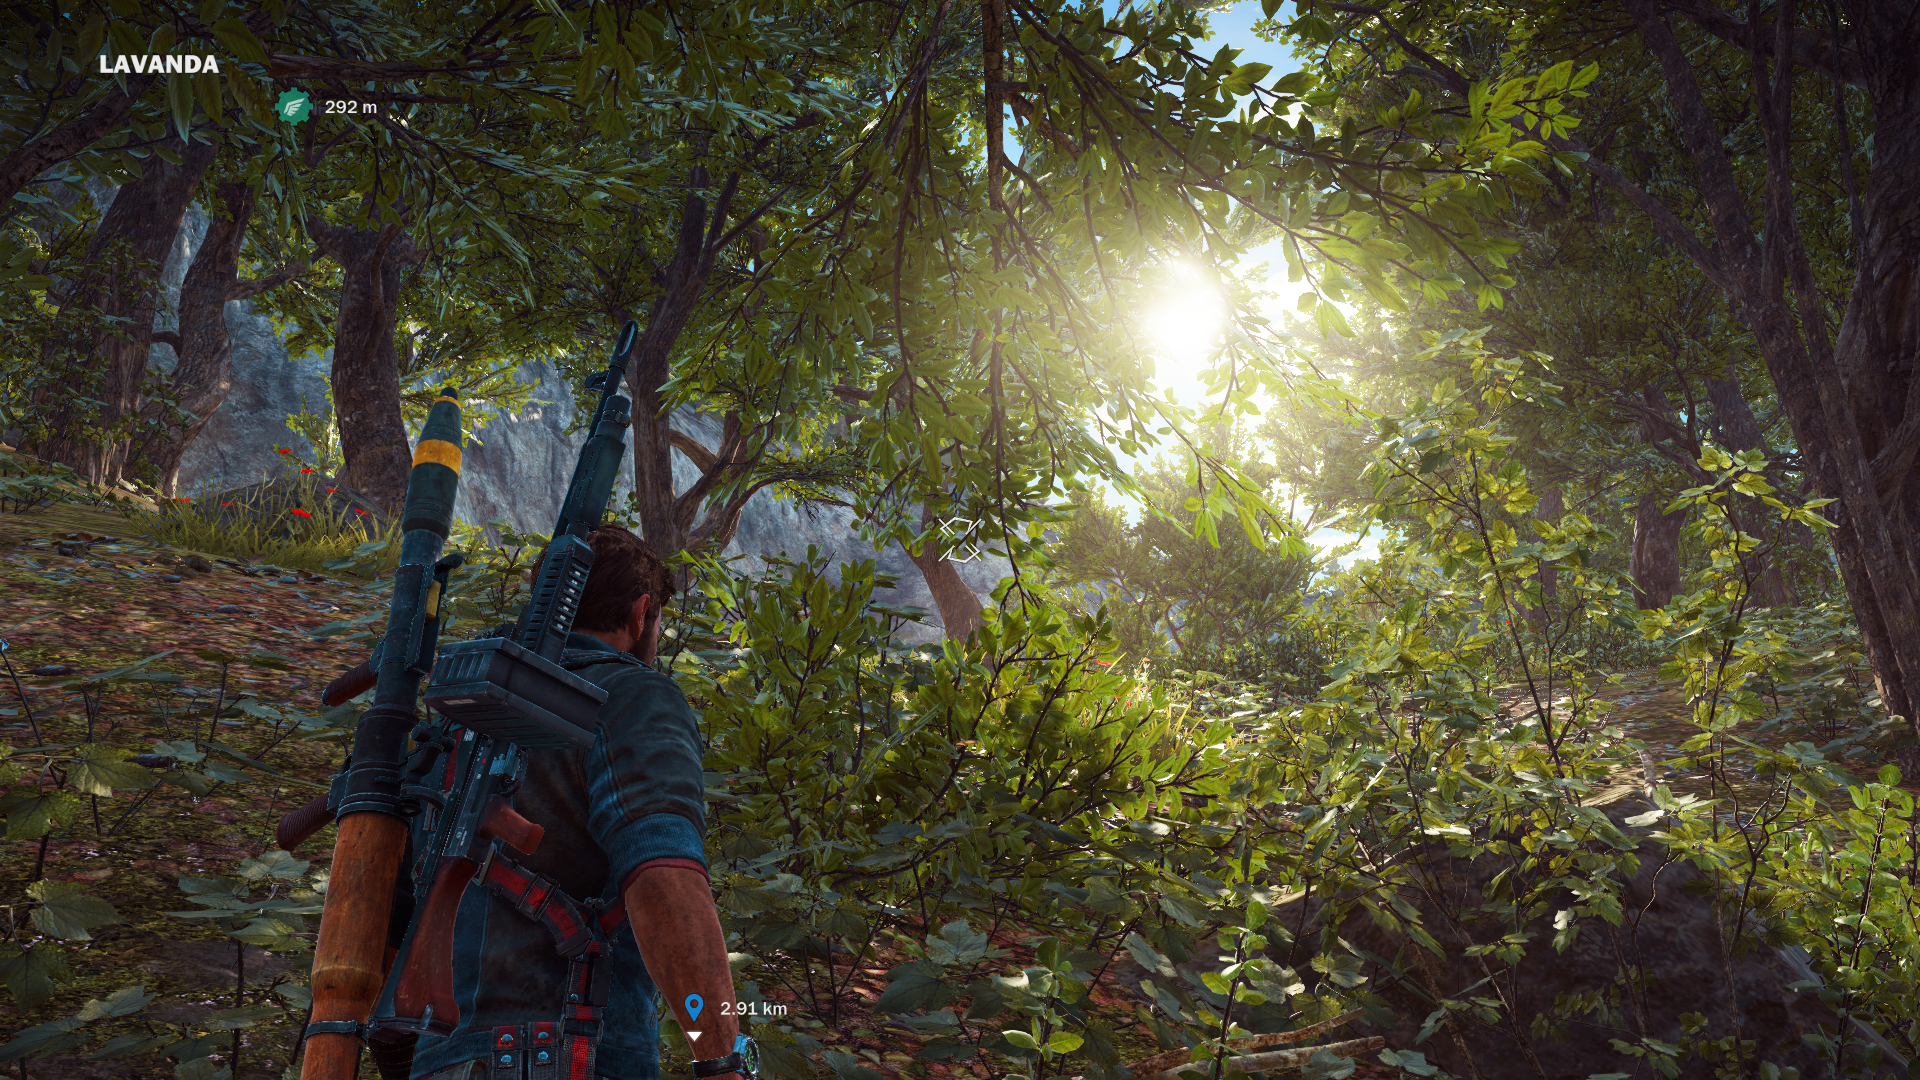 justcause3_20151204238qlcx.png